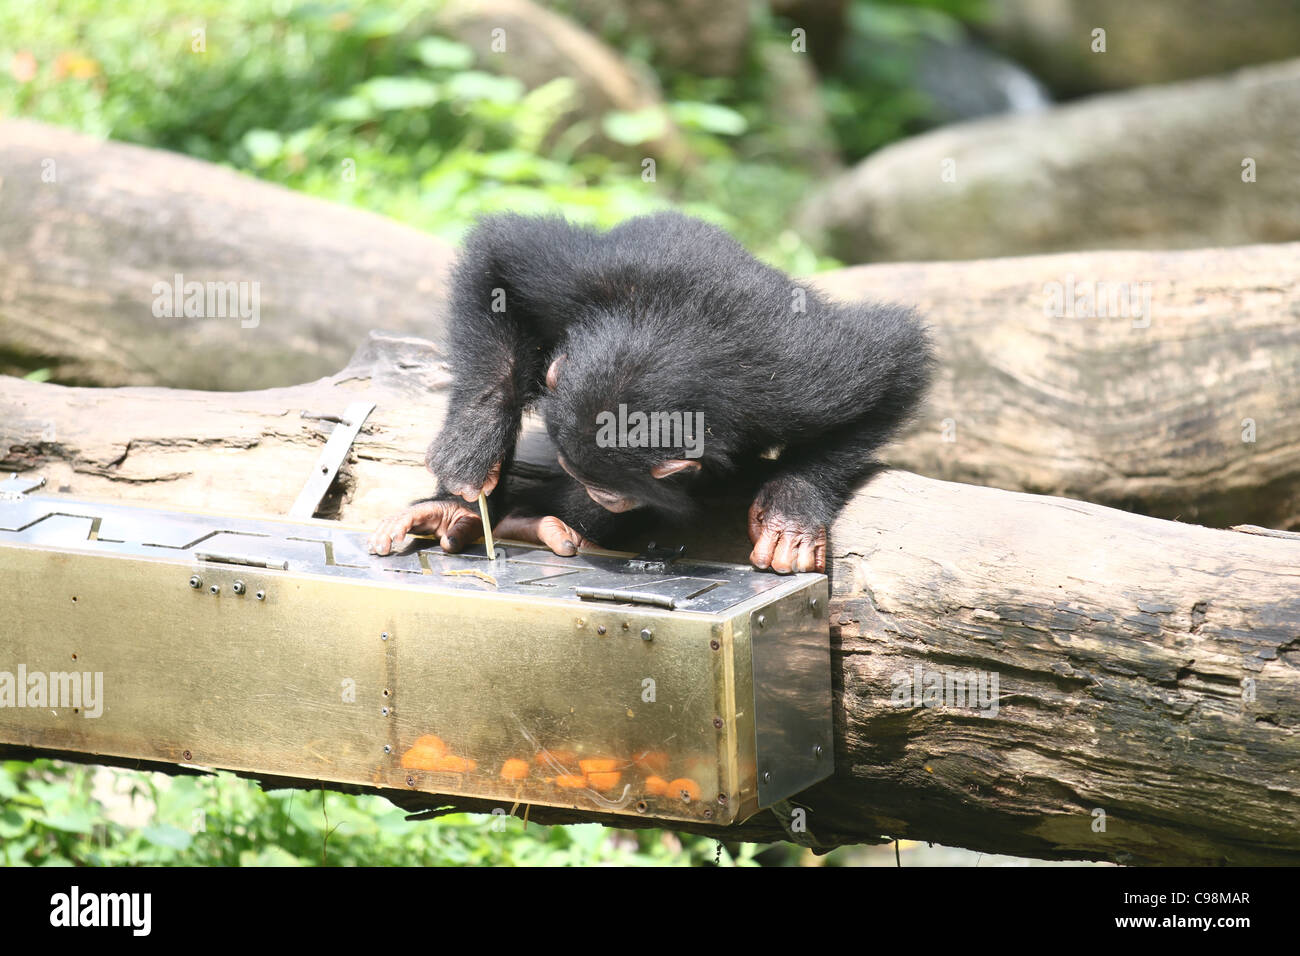 Chimpanzee using a stick to get food out of a box Stock Photo